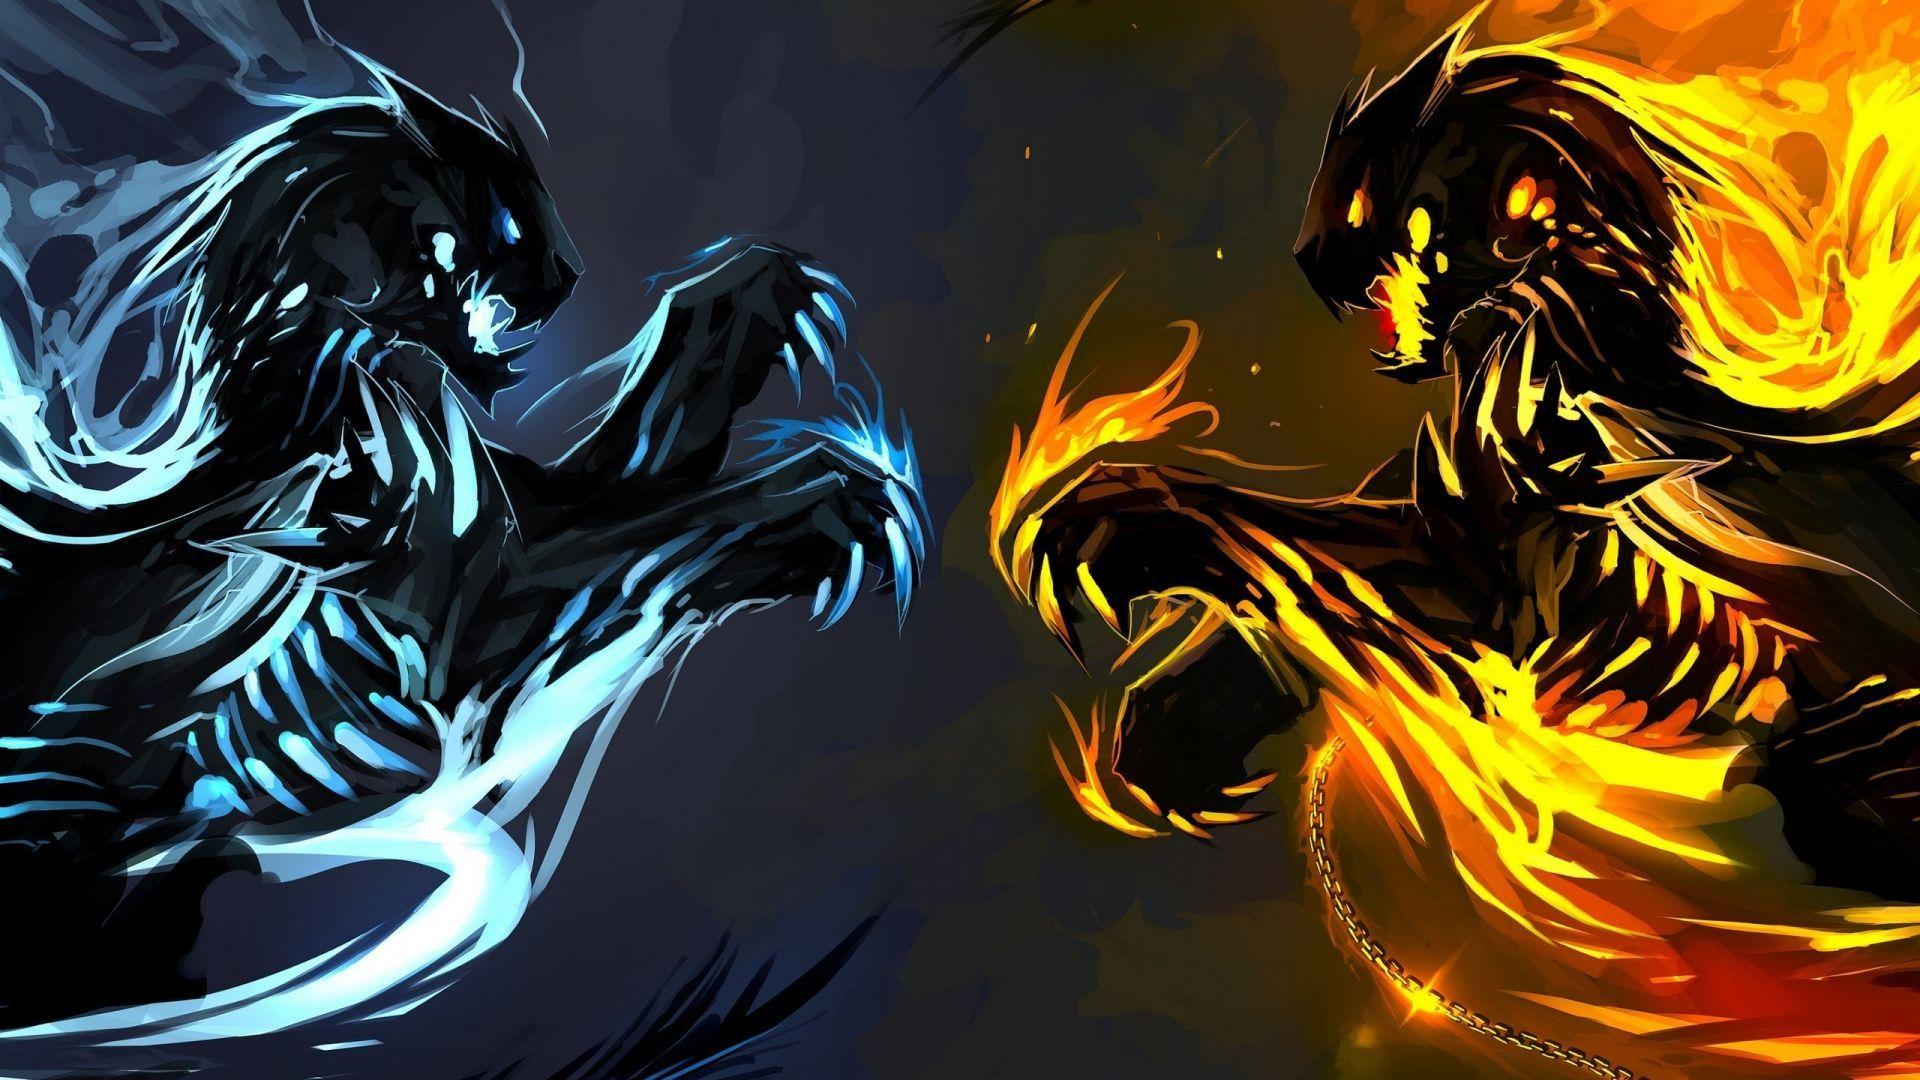 Ice and Fire Dragons wallpaper 2560x1440. Ice dragon